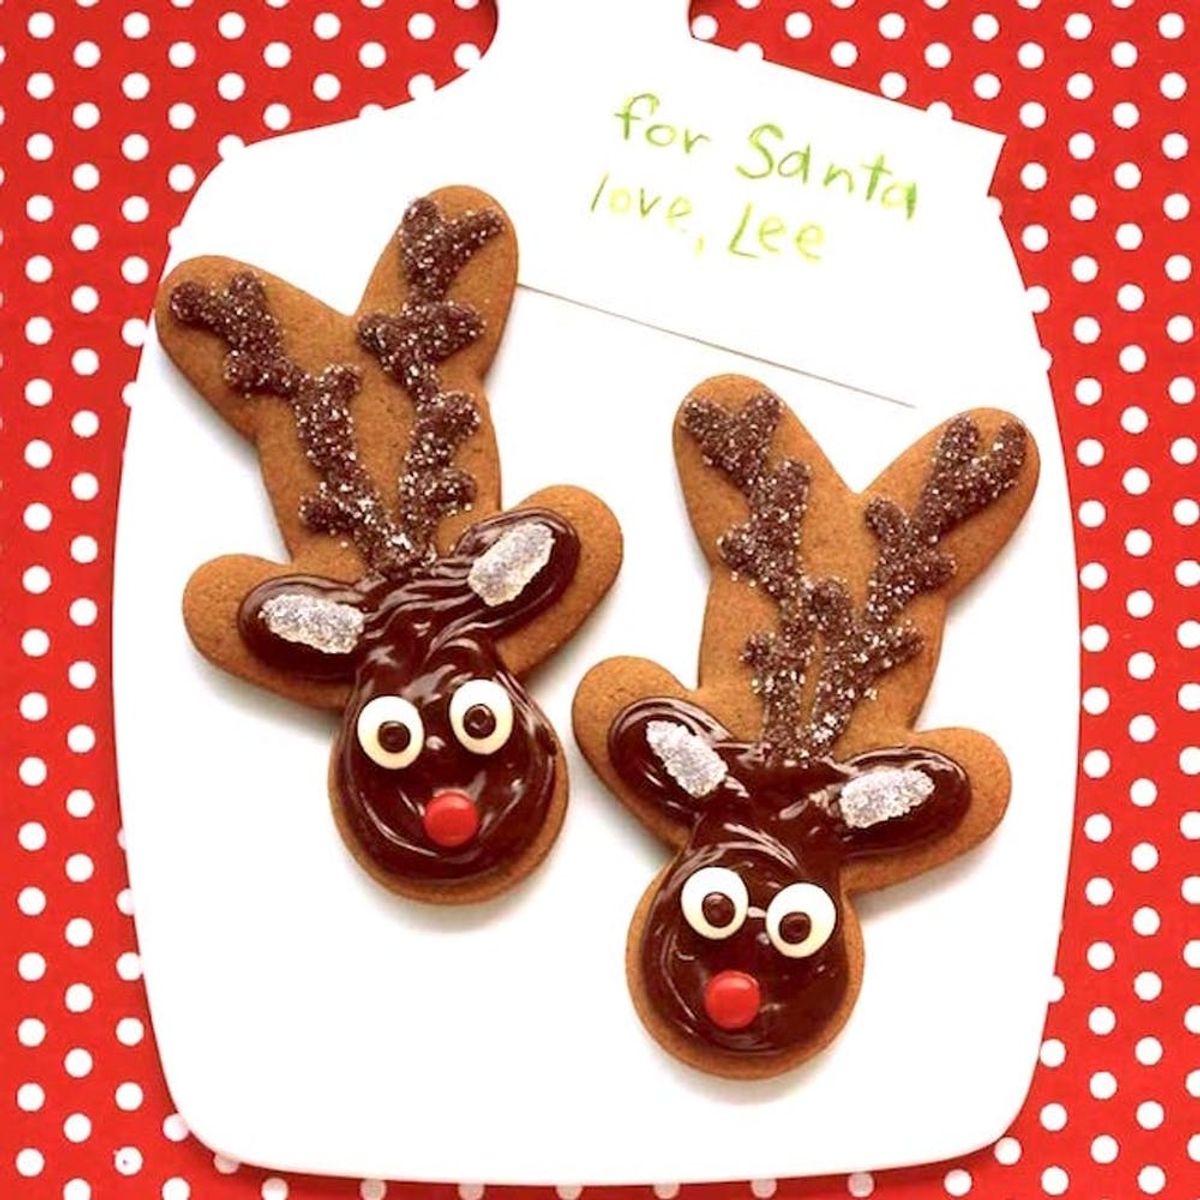 14 Cute Christmas Treats to Make With Your Kids